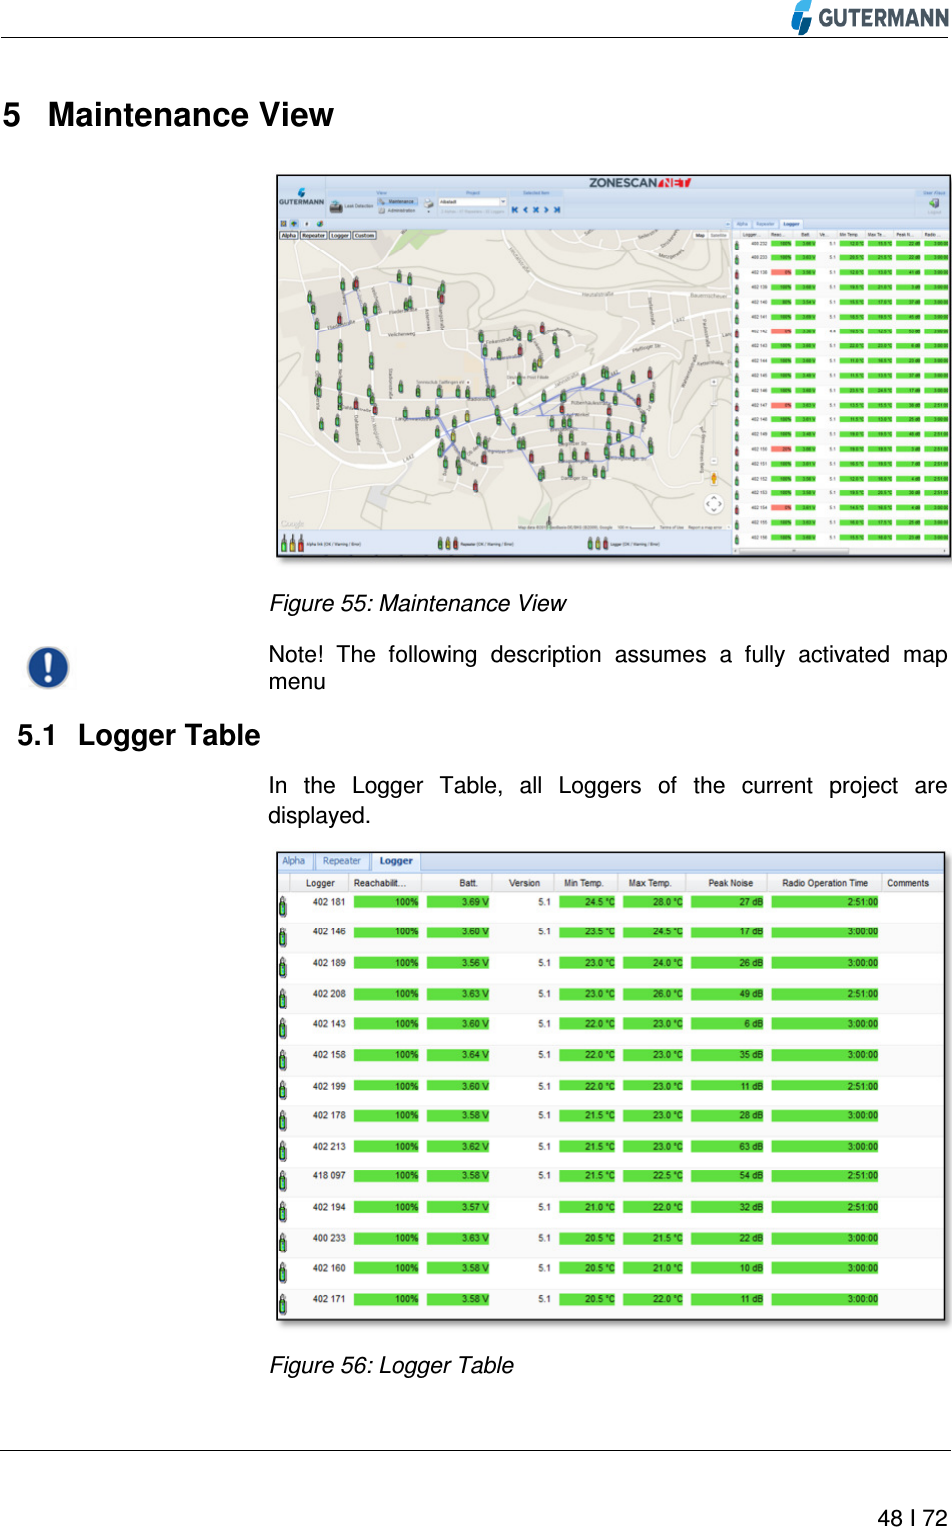          48 I 72  5  Maintenance View  Figure 55: Maintenance View  Note!  The  following  description  assumes  a  fully  activated  map menu   Logger Table 5.1In  the  Logger  Table,  all  Loggers  of  the  current  project  are displayed.  Figure 56: Logger Table 